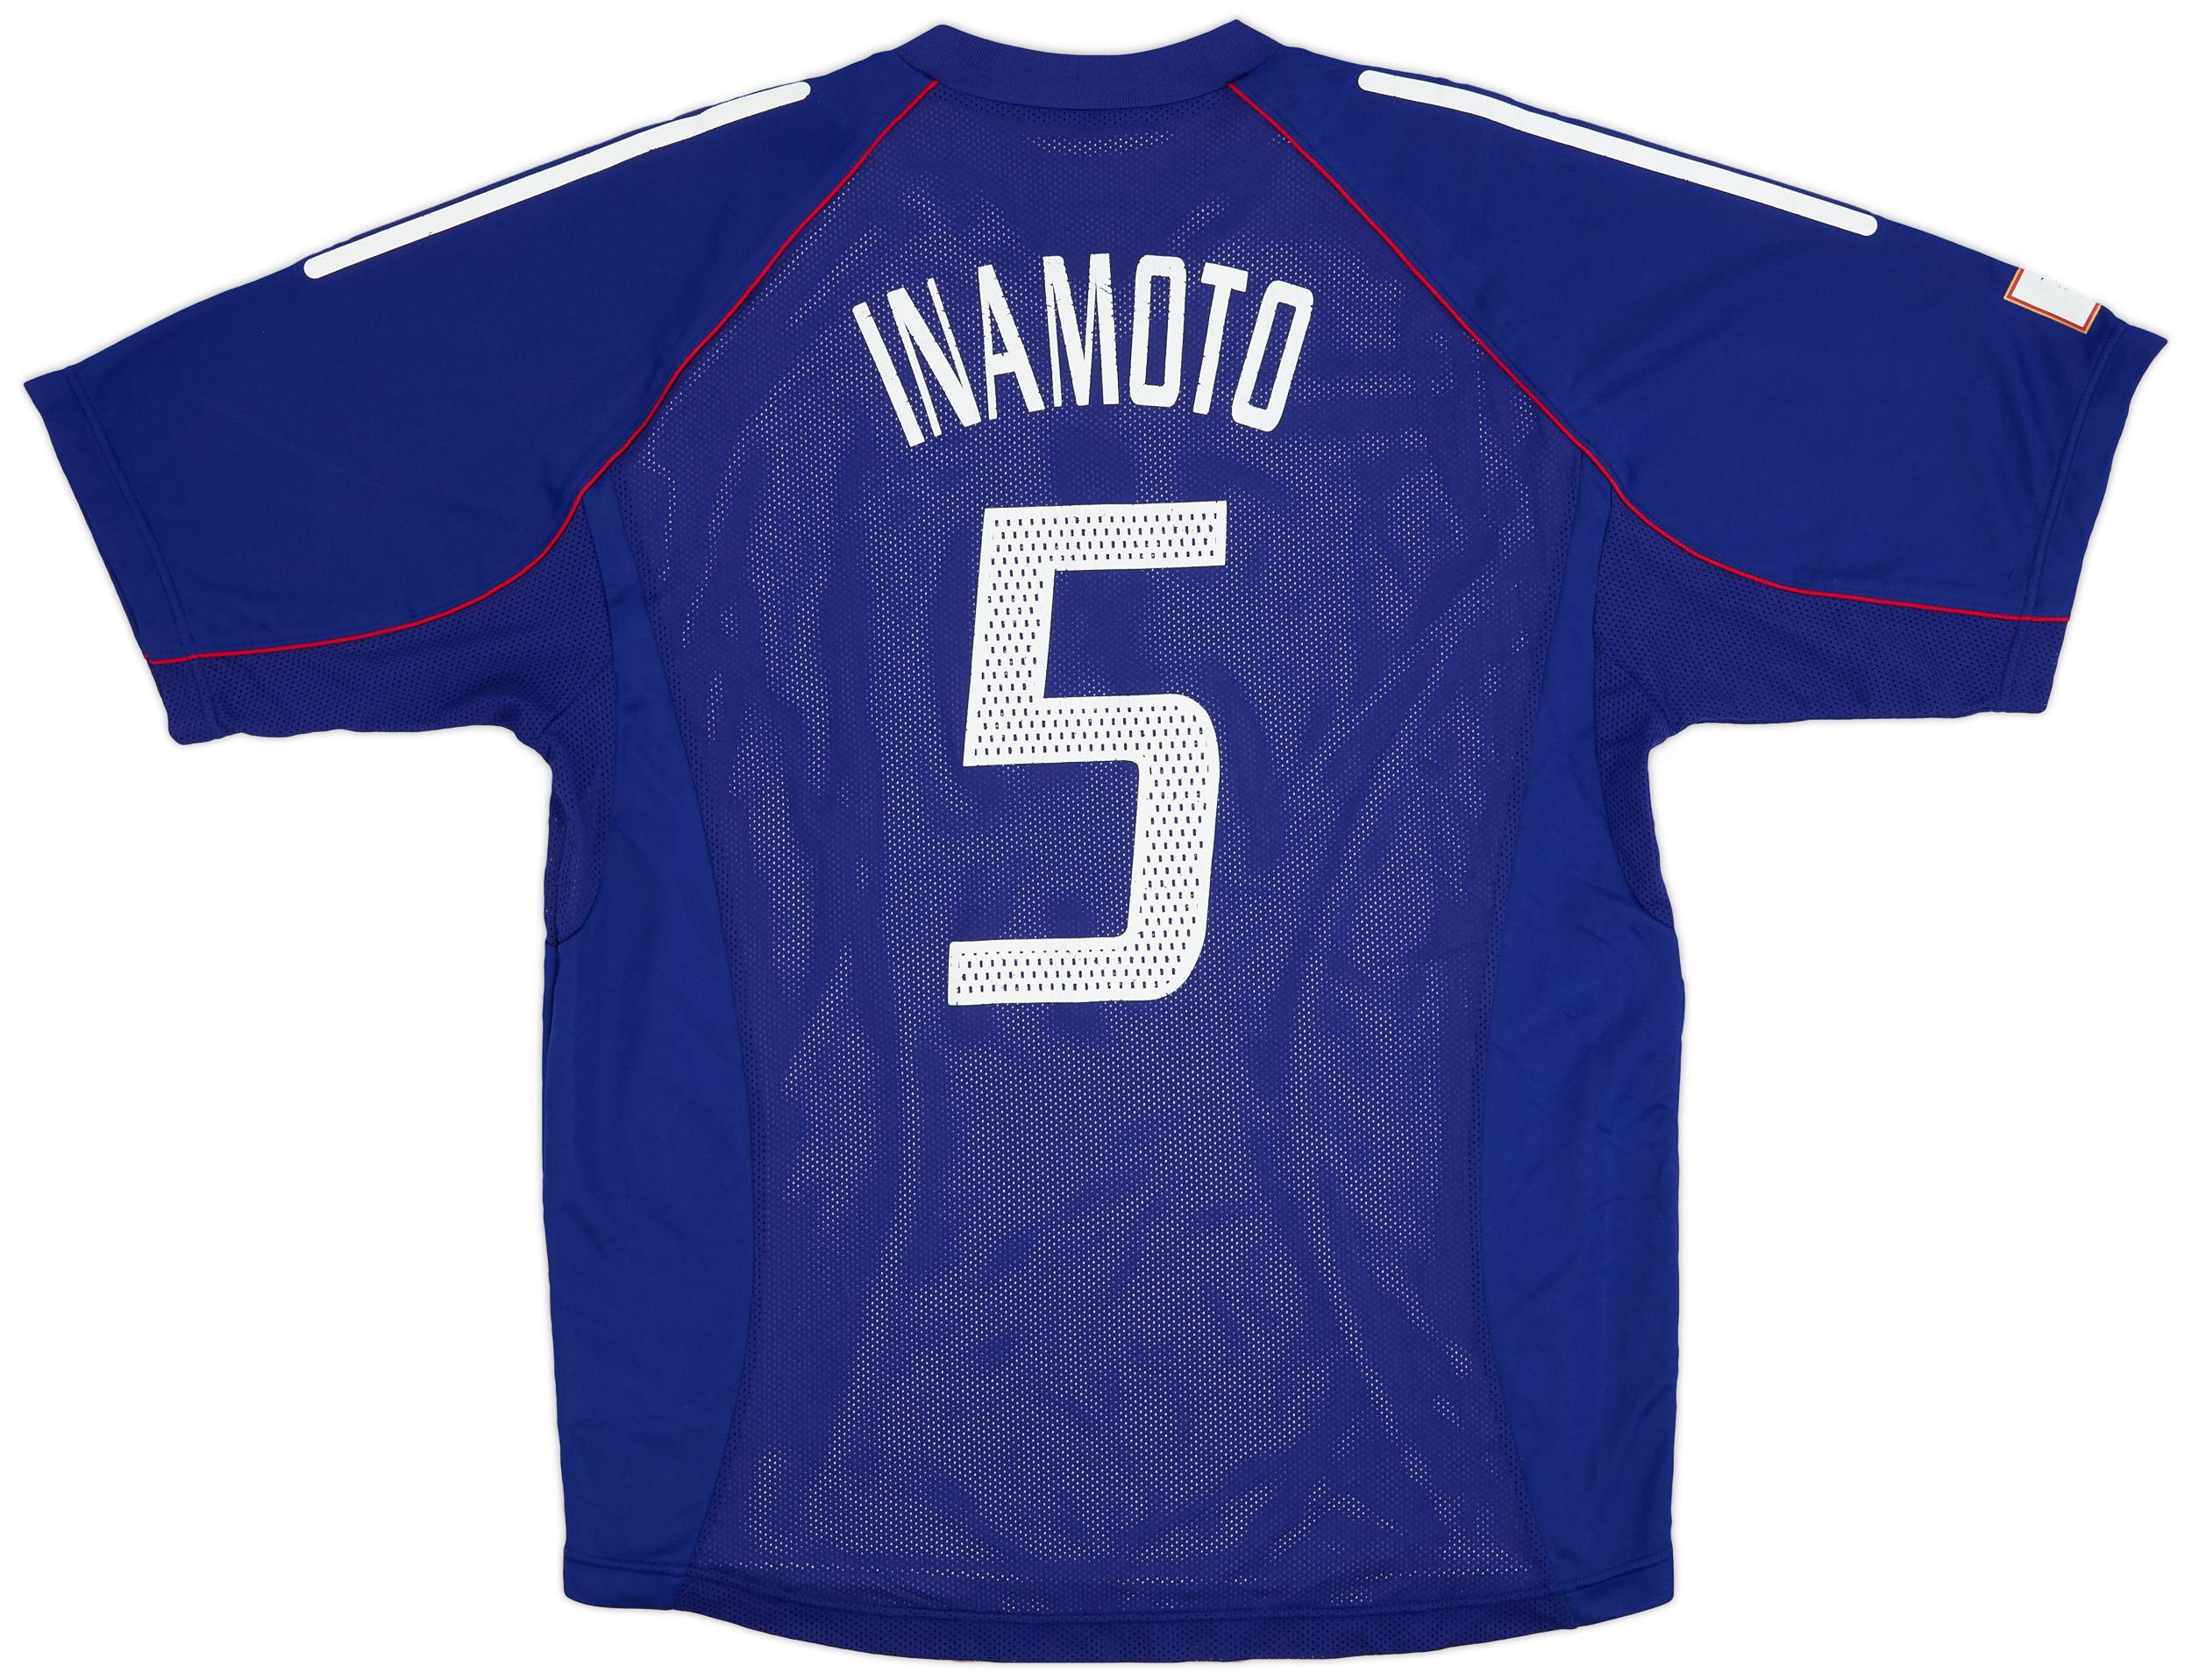 2002-04 Japan Player Issue Home Shirt Inamoto #5 - 8/10 - (XL)